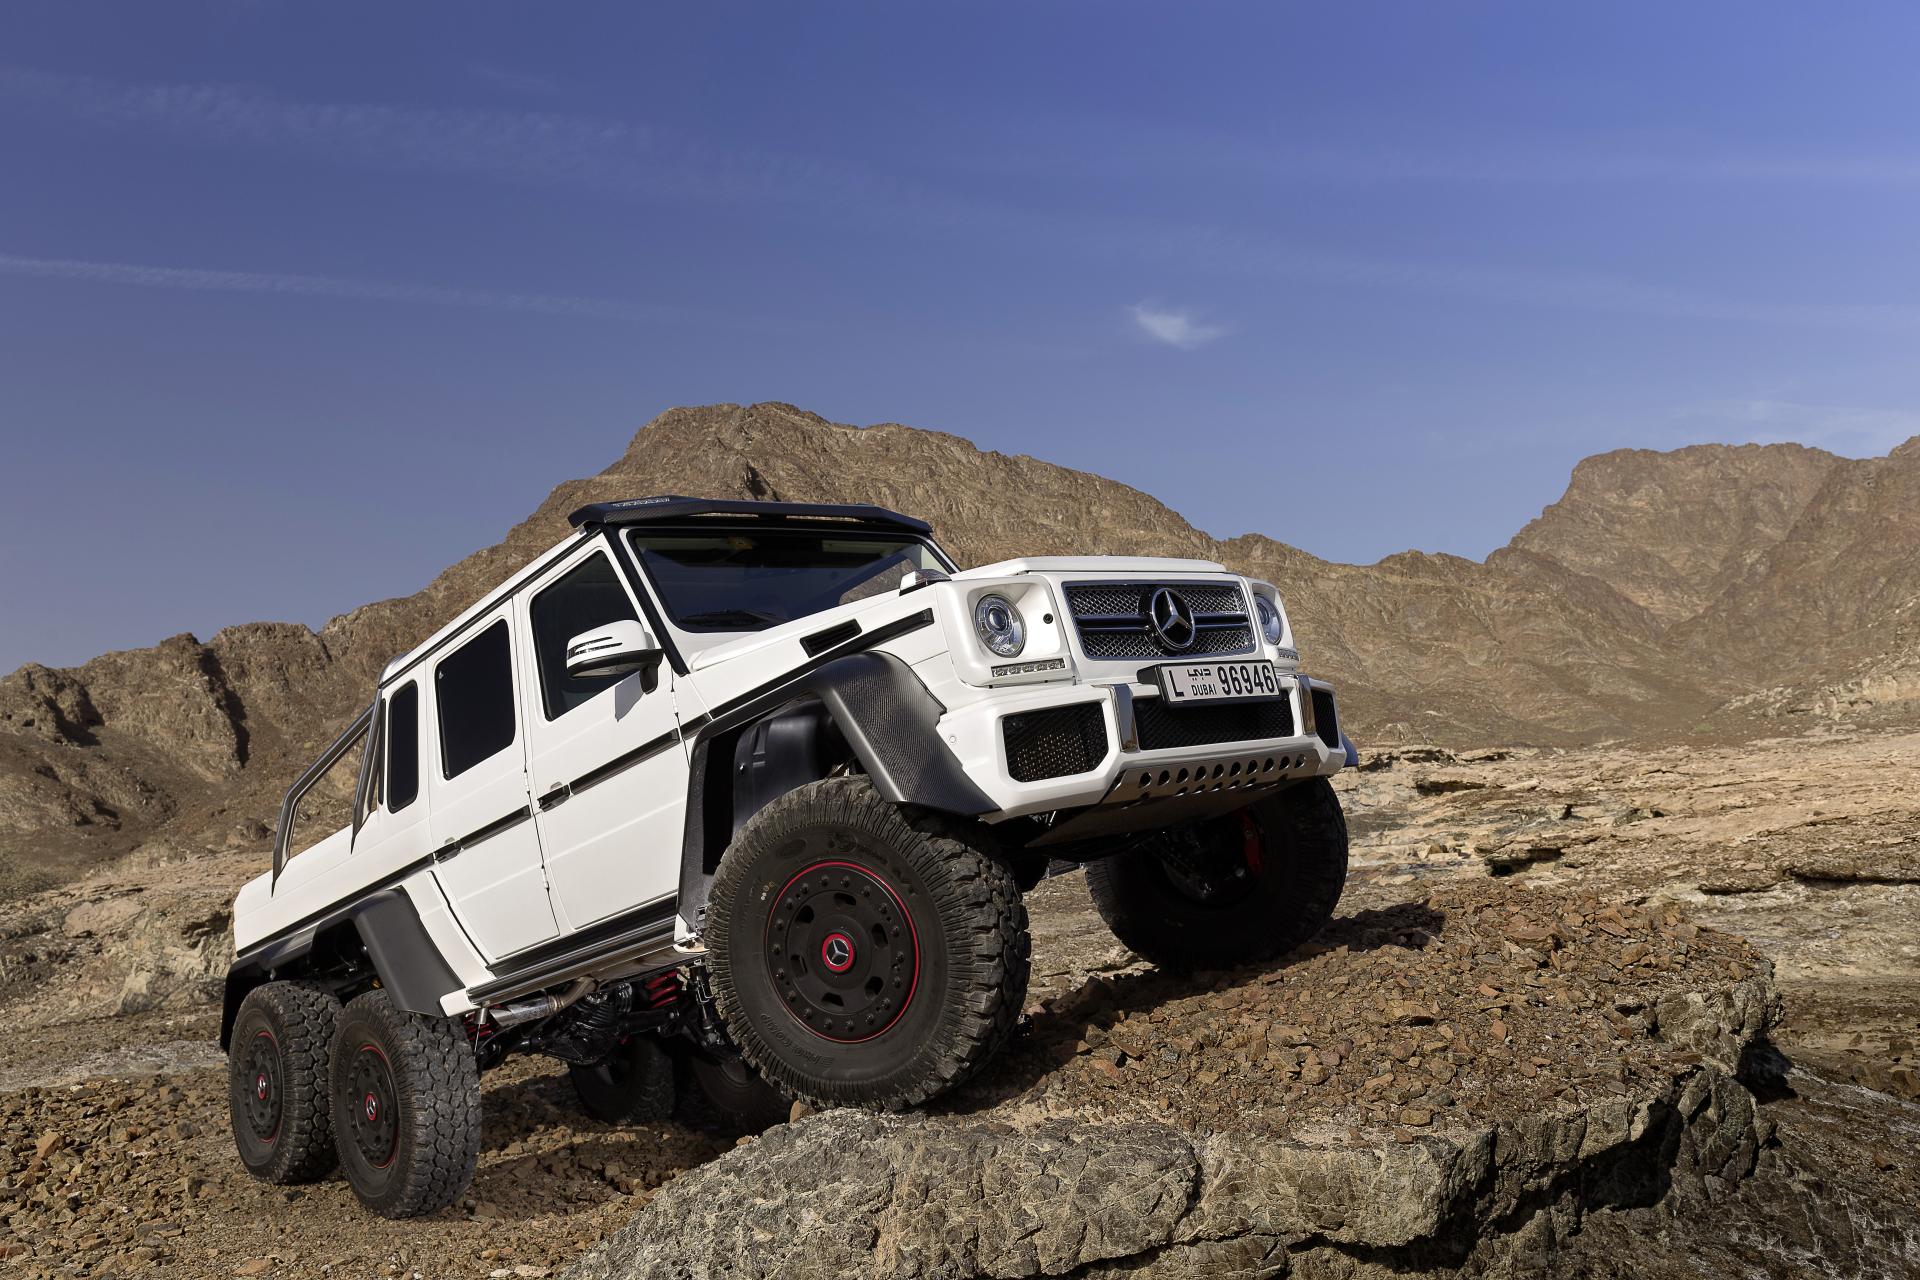 MercedesBenz G63 AMG 6x6 Concept News and Information, Research, and Pricing